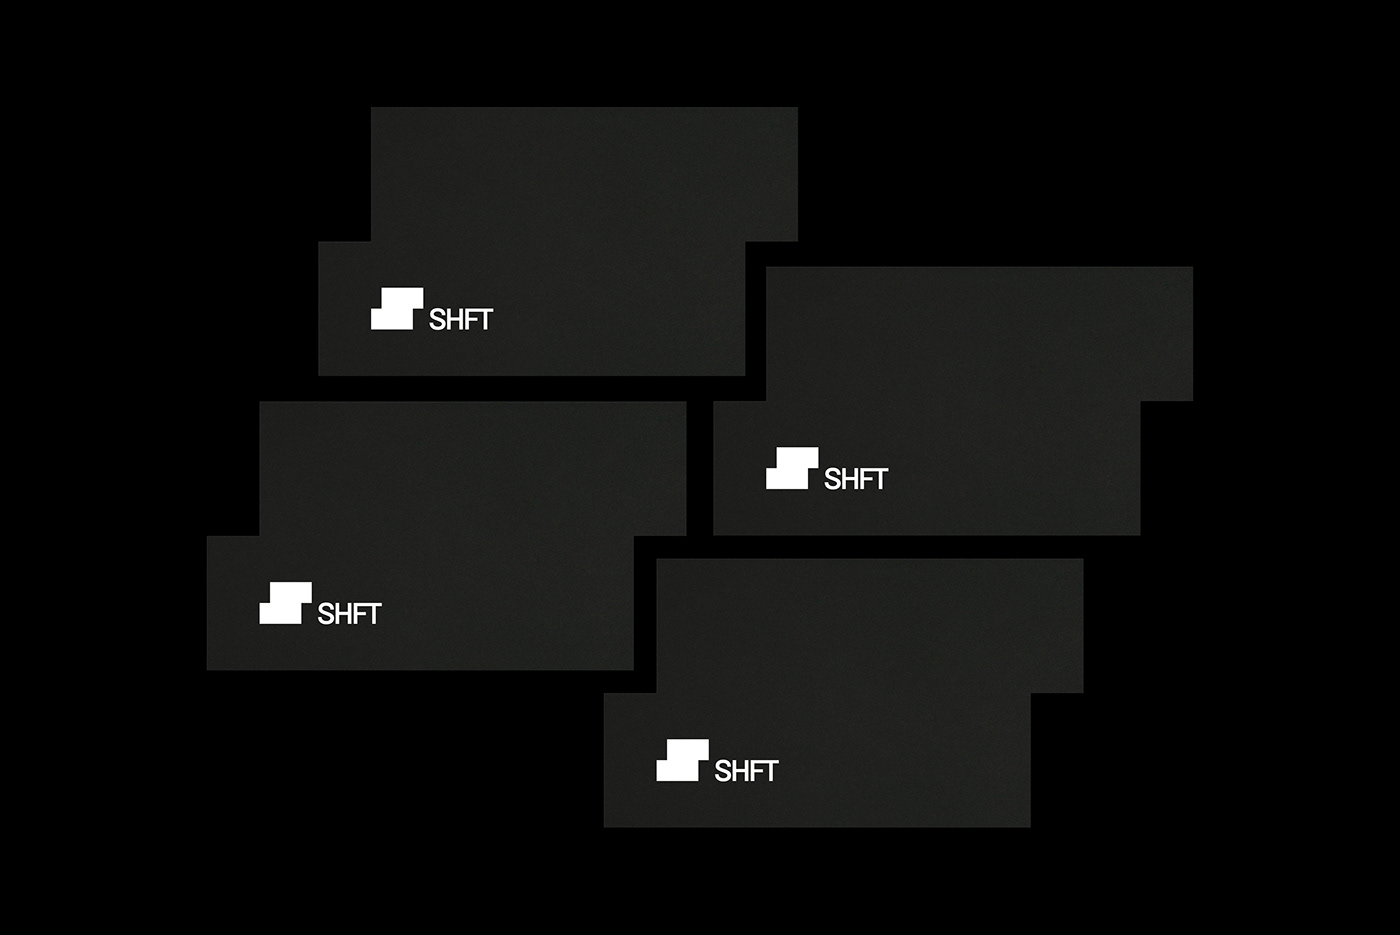 Business cards mockup in black and white for SHFT.